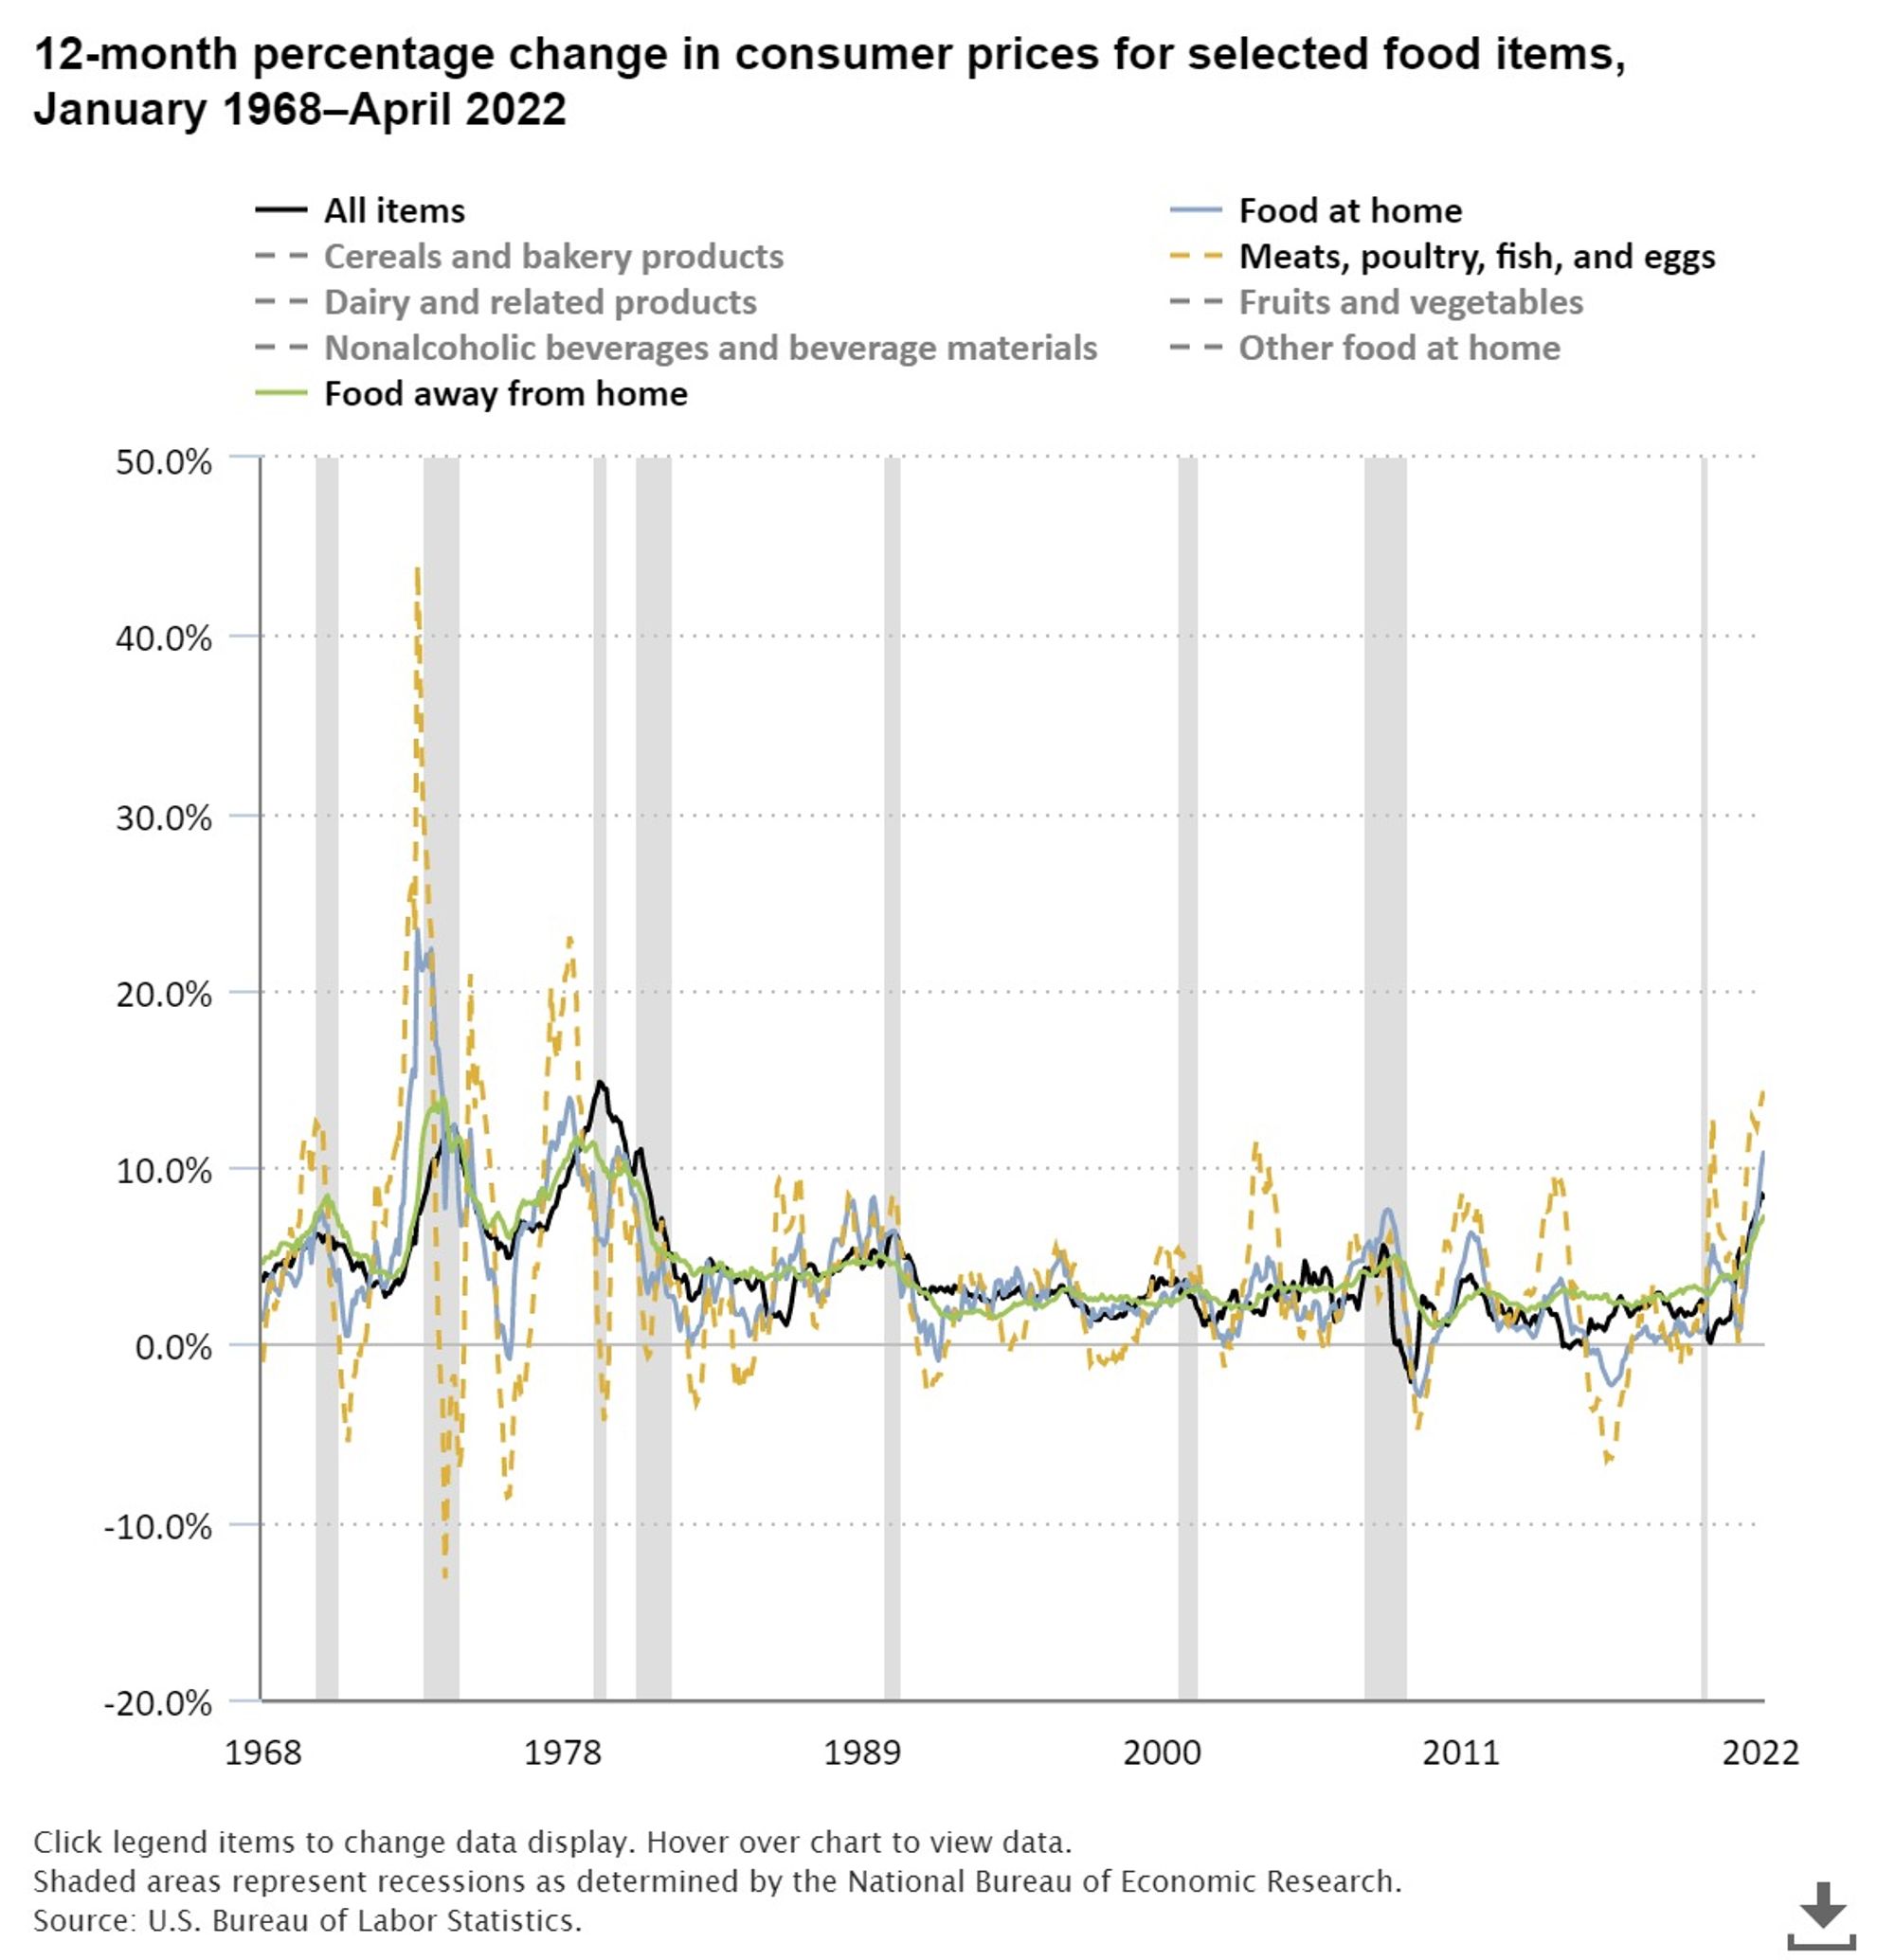 The 12 Month Percentage Change in Consumer Prices for Selected Food Items - Jan 1968-April 2022